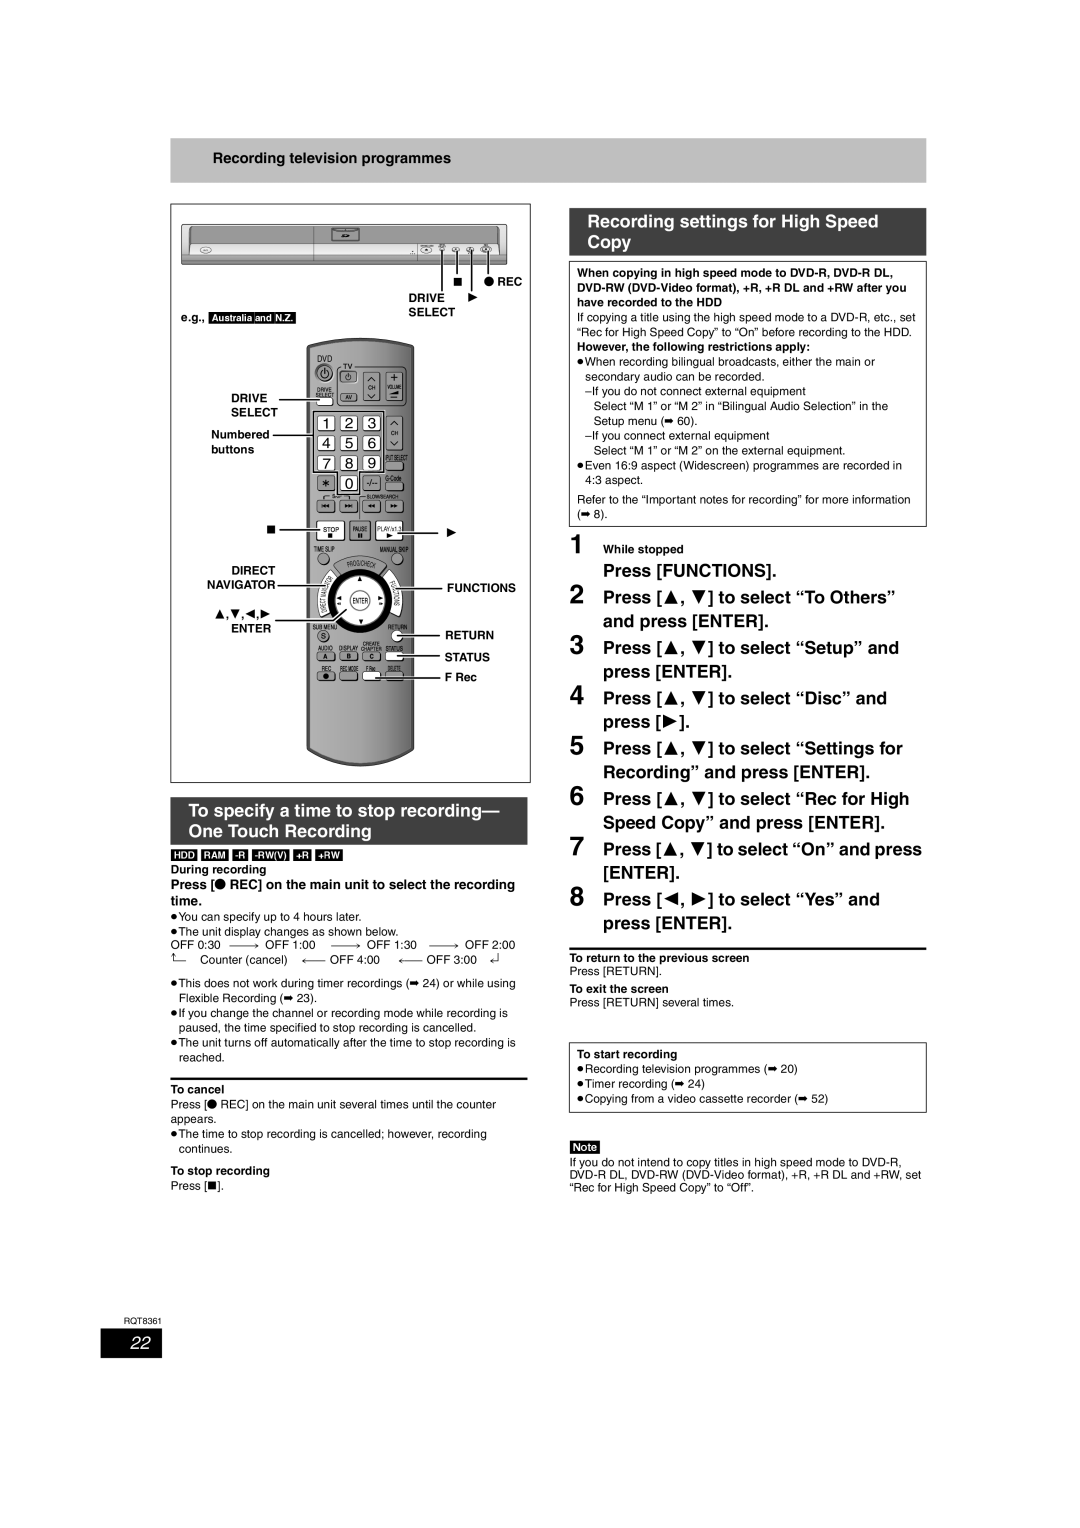 Philips DMR-EH55 To specify a time to stop recording- One Touch Recording, Recording settings for High Speed Copy 